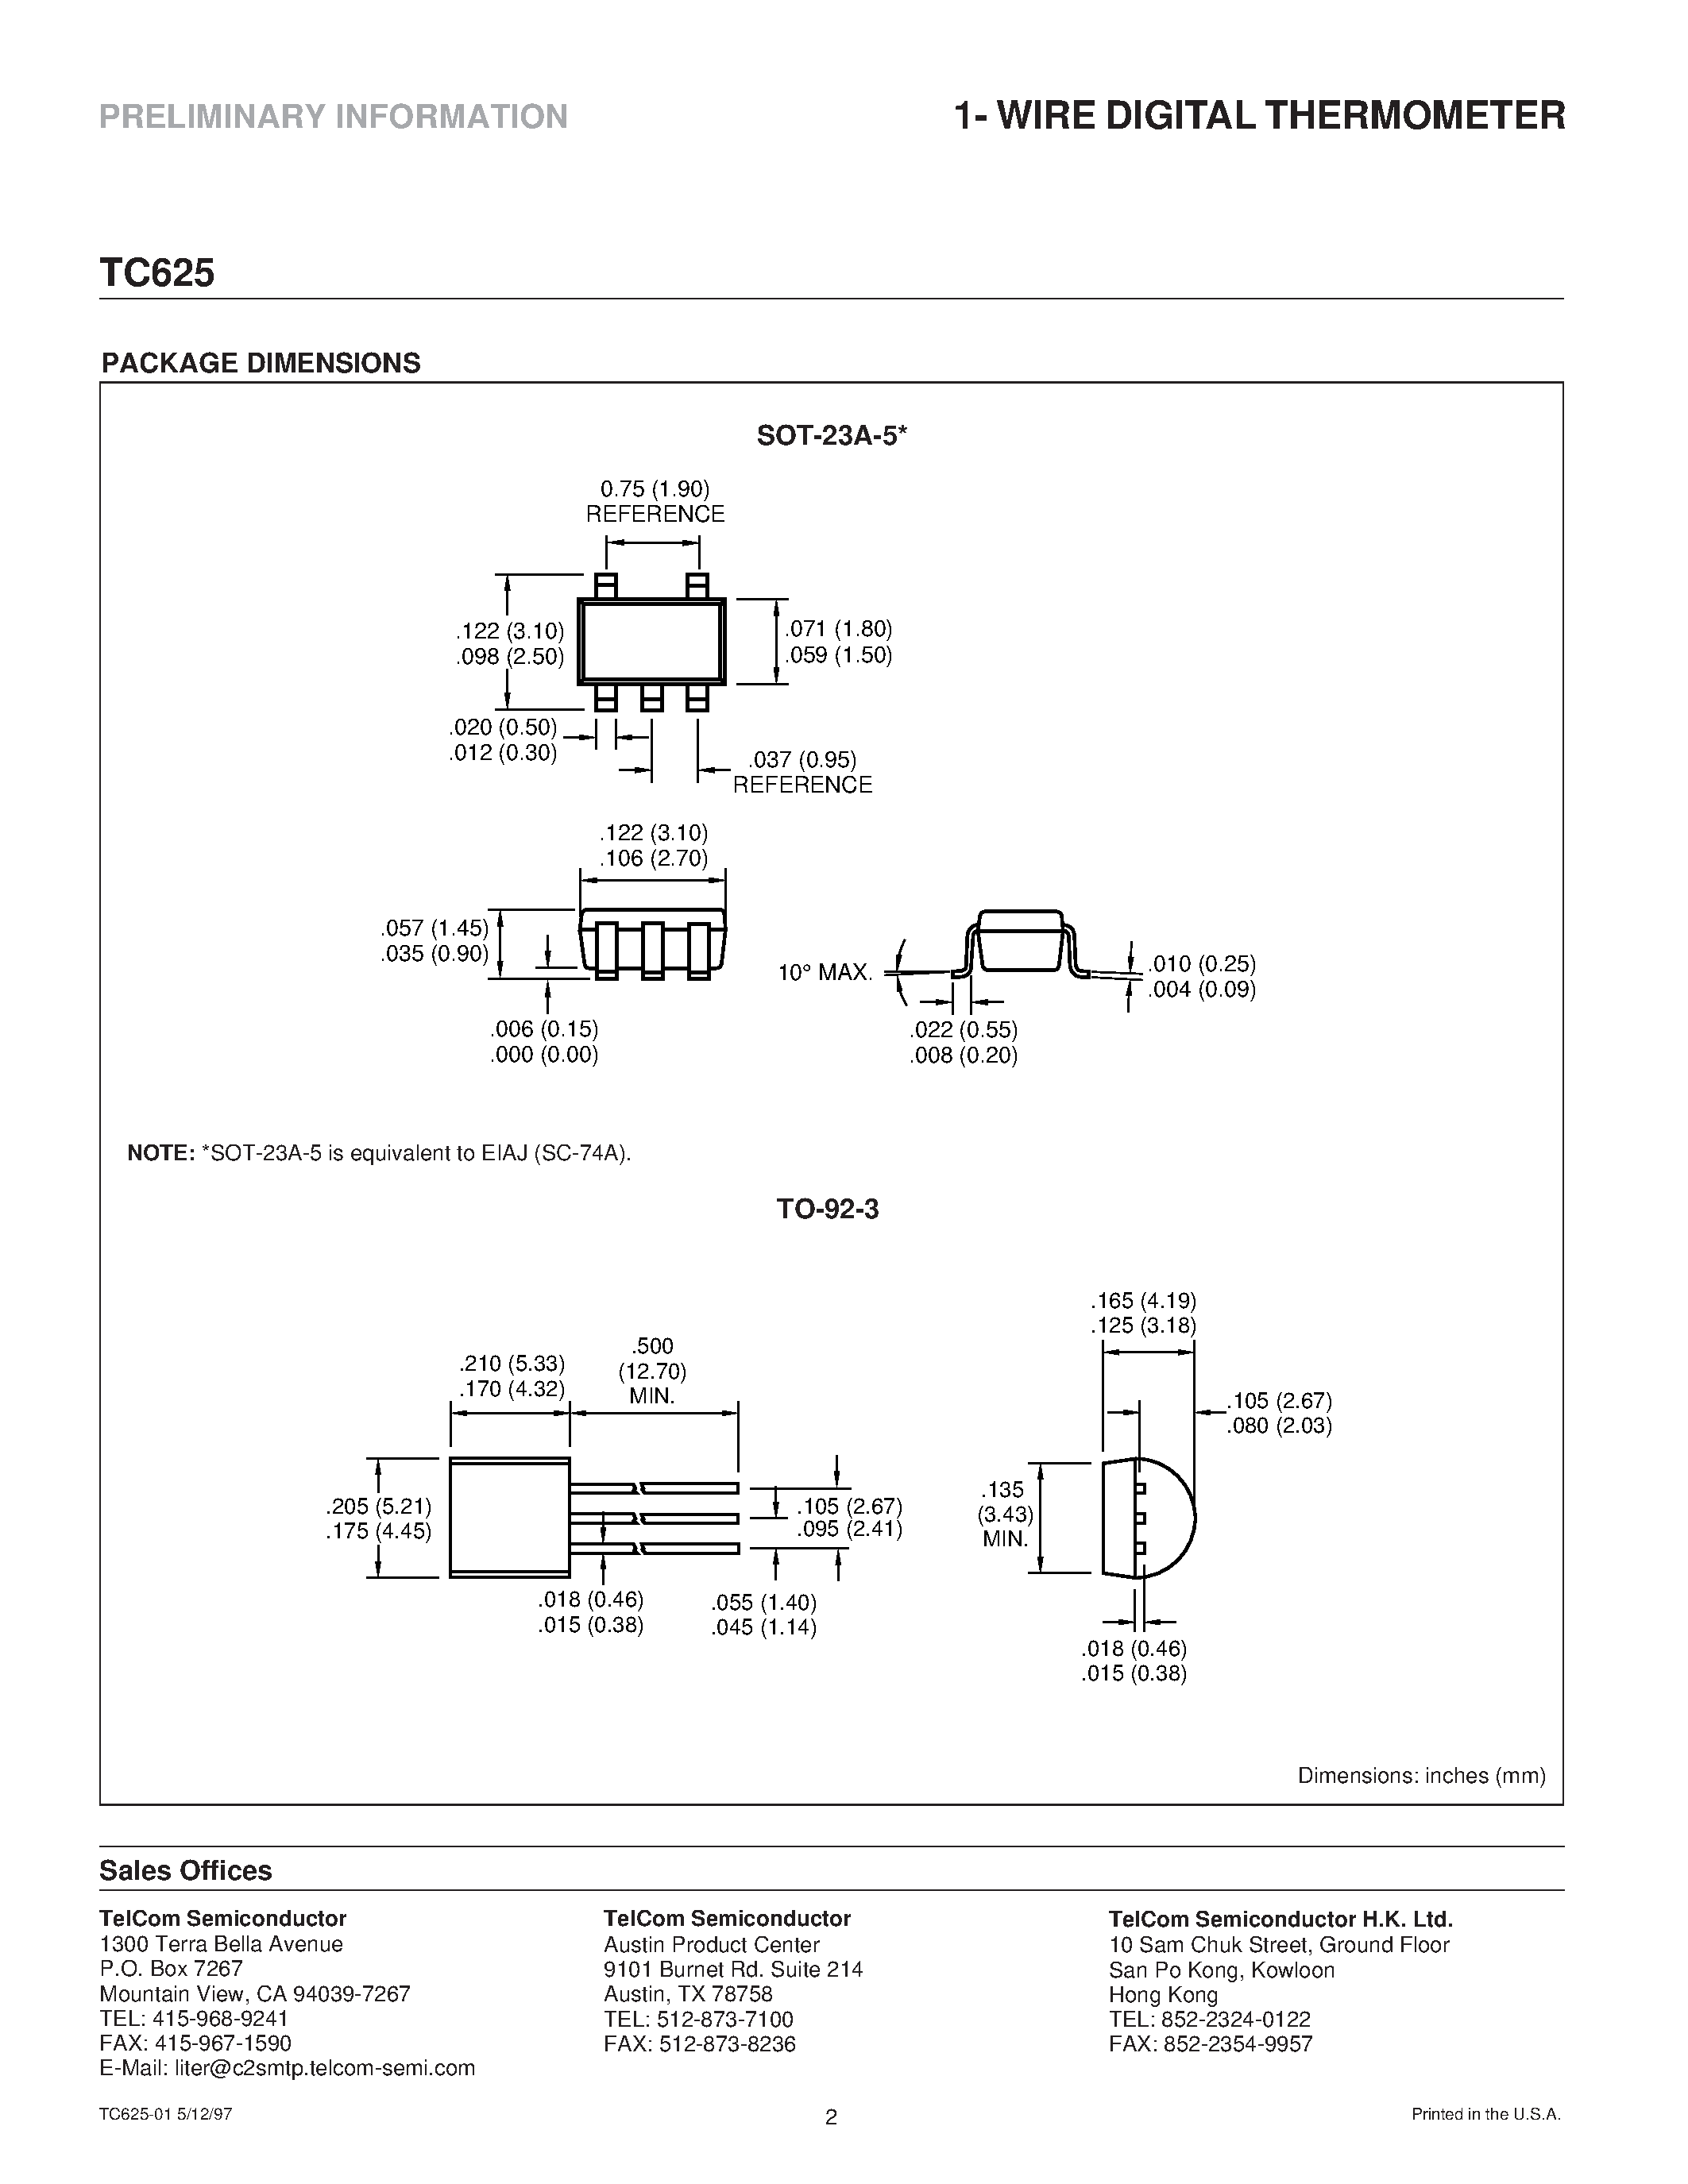 Datasheet TC625 - 1-WIRE DIGITAL THERMOMETER page 2